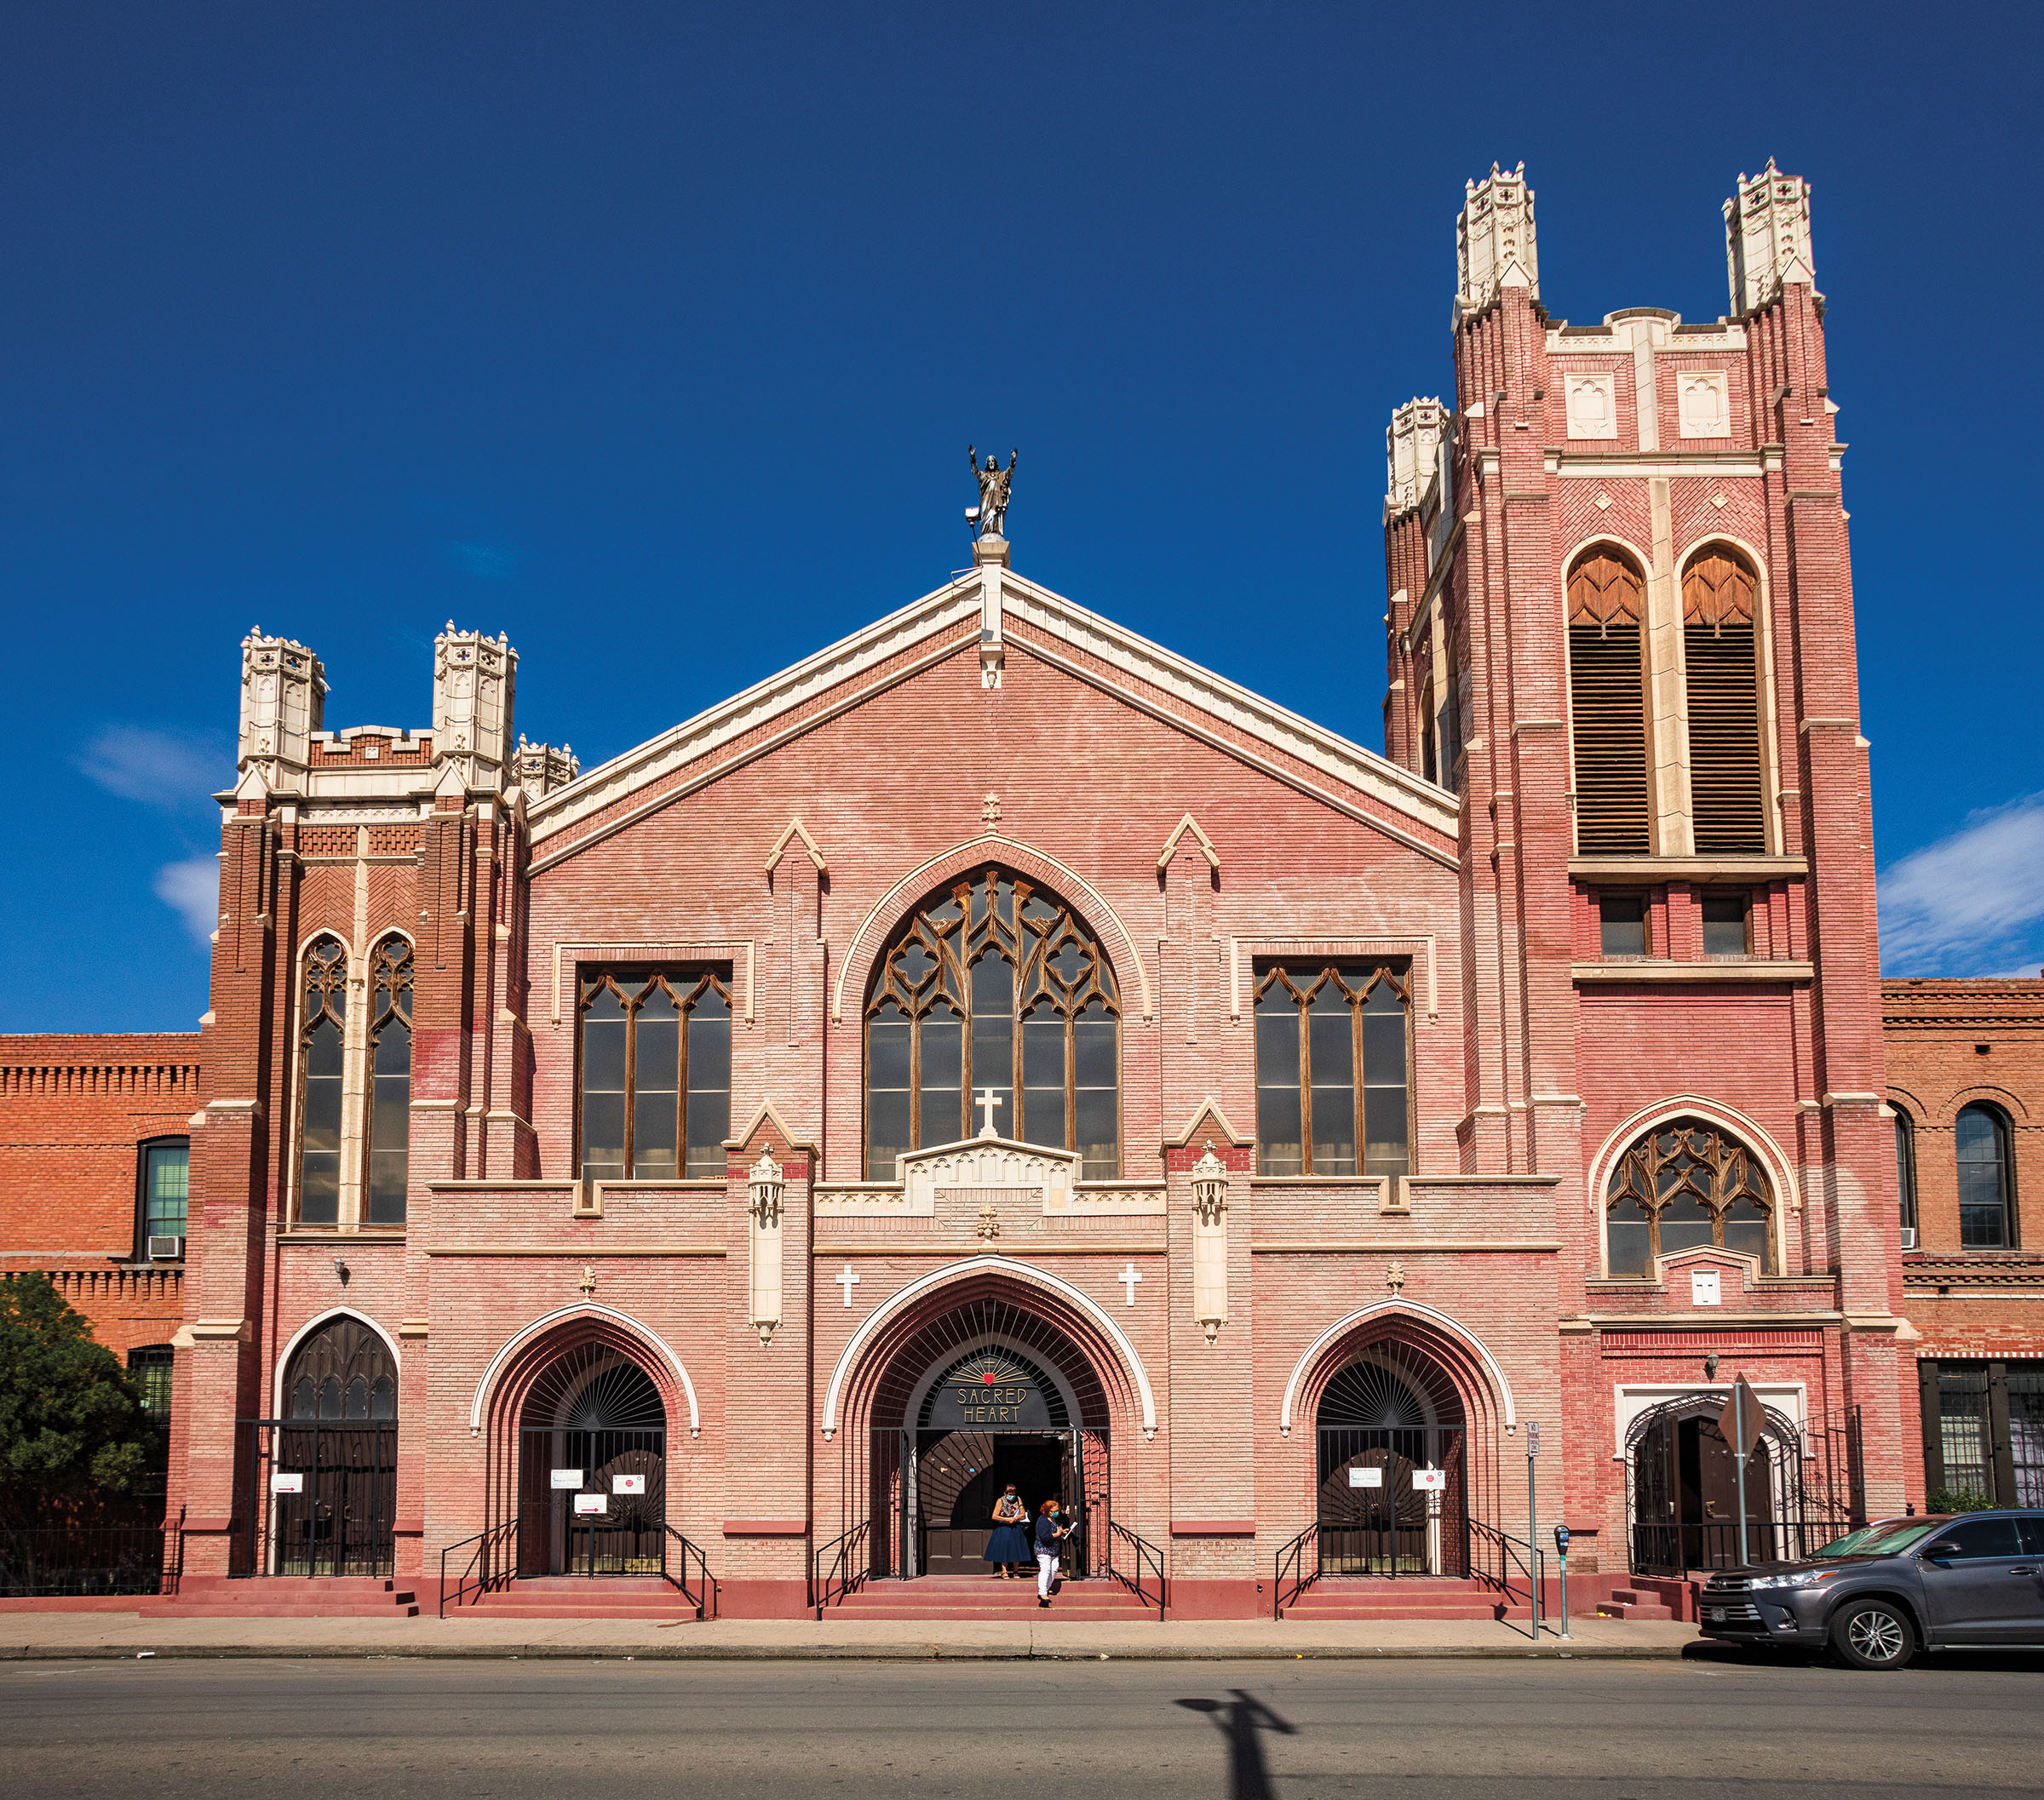 The red brick exterior of a church with a large steeple on the right side, shorter one on the left side, and two people standing out front